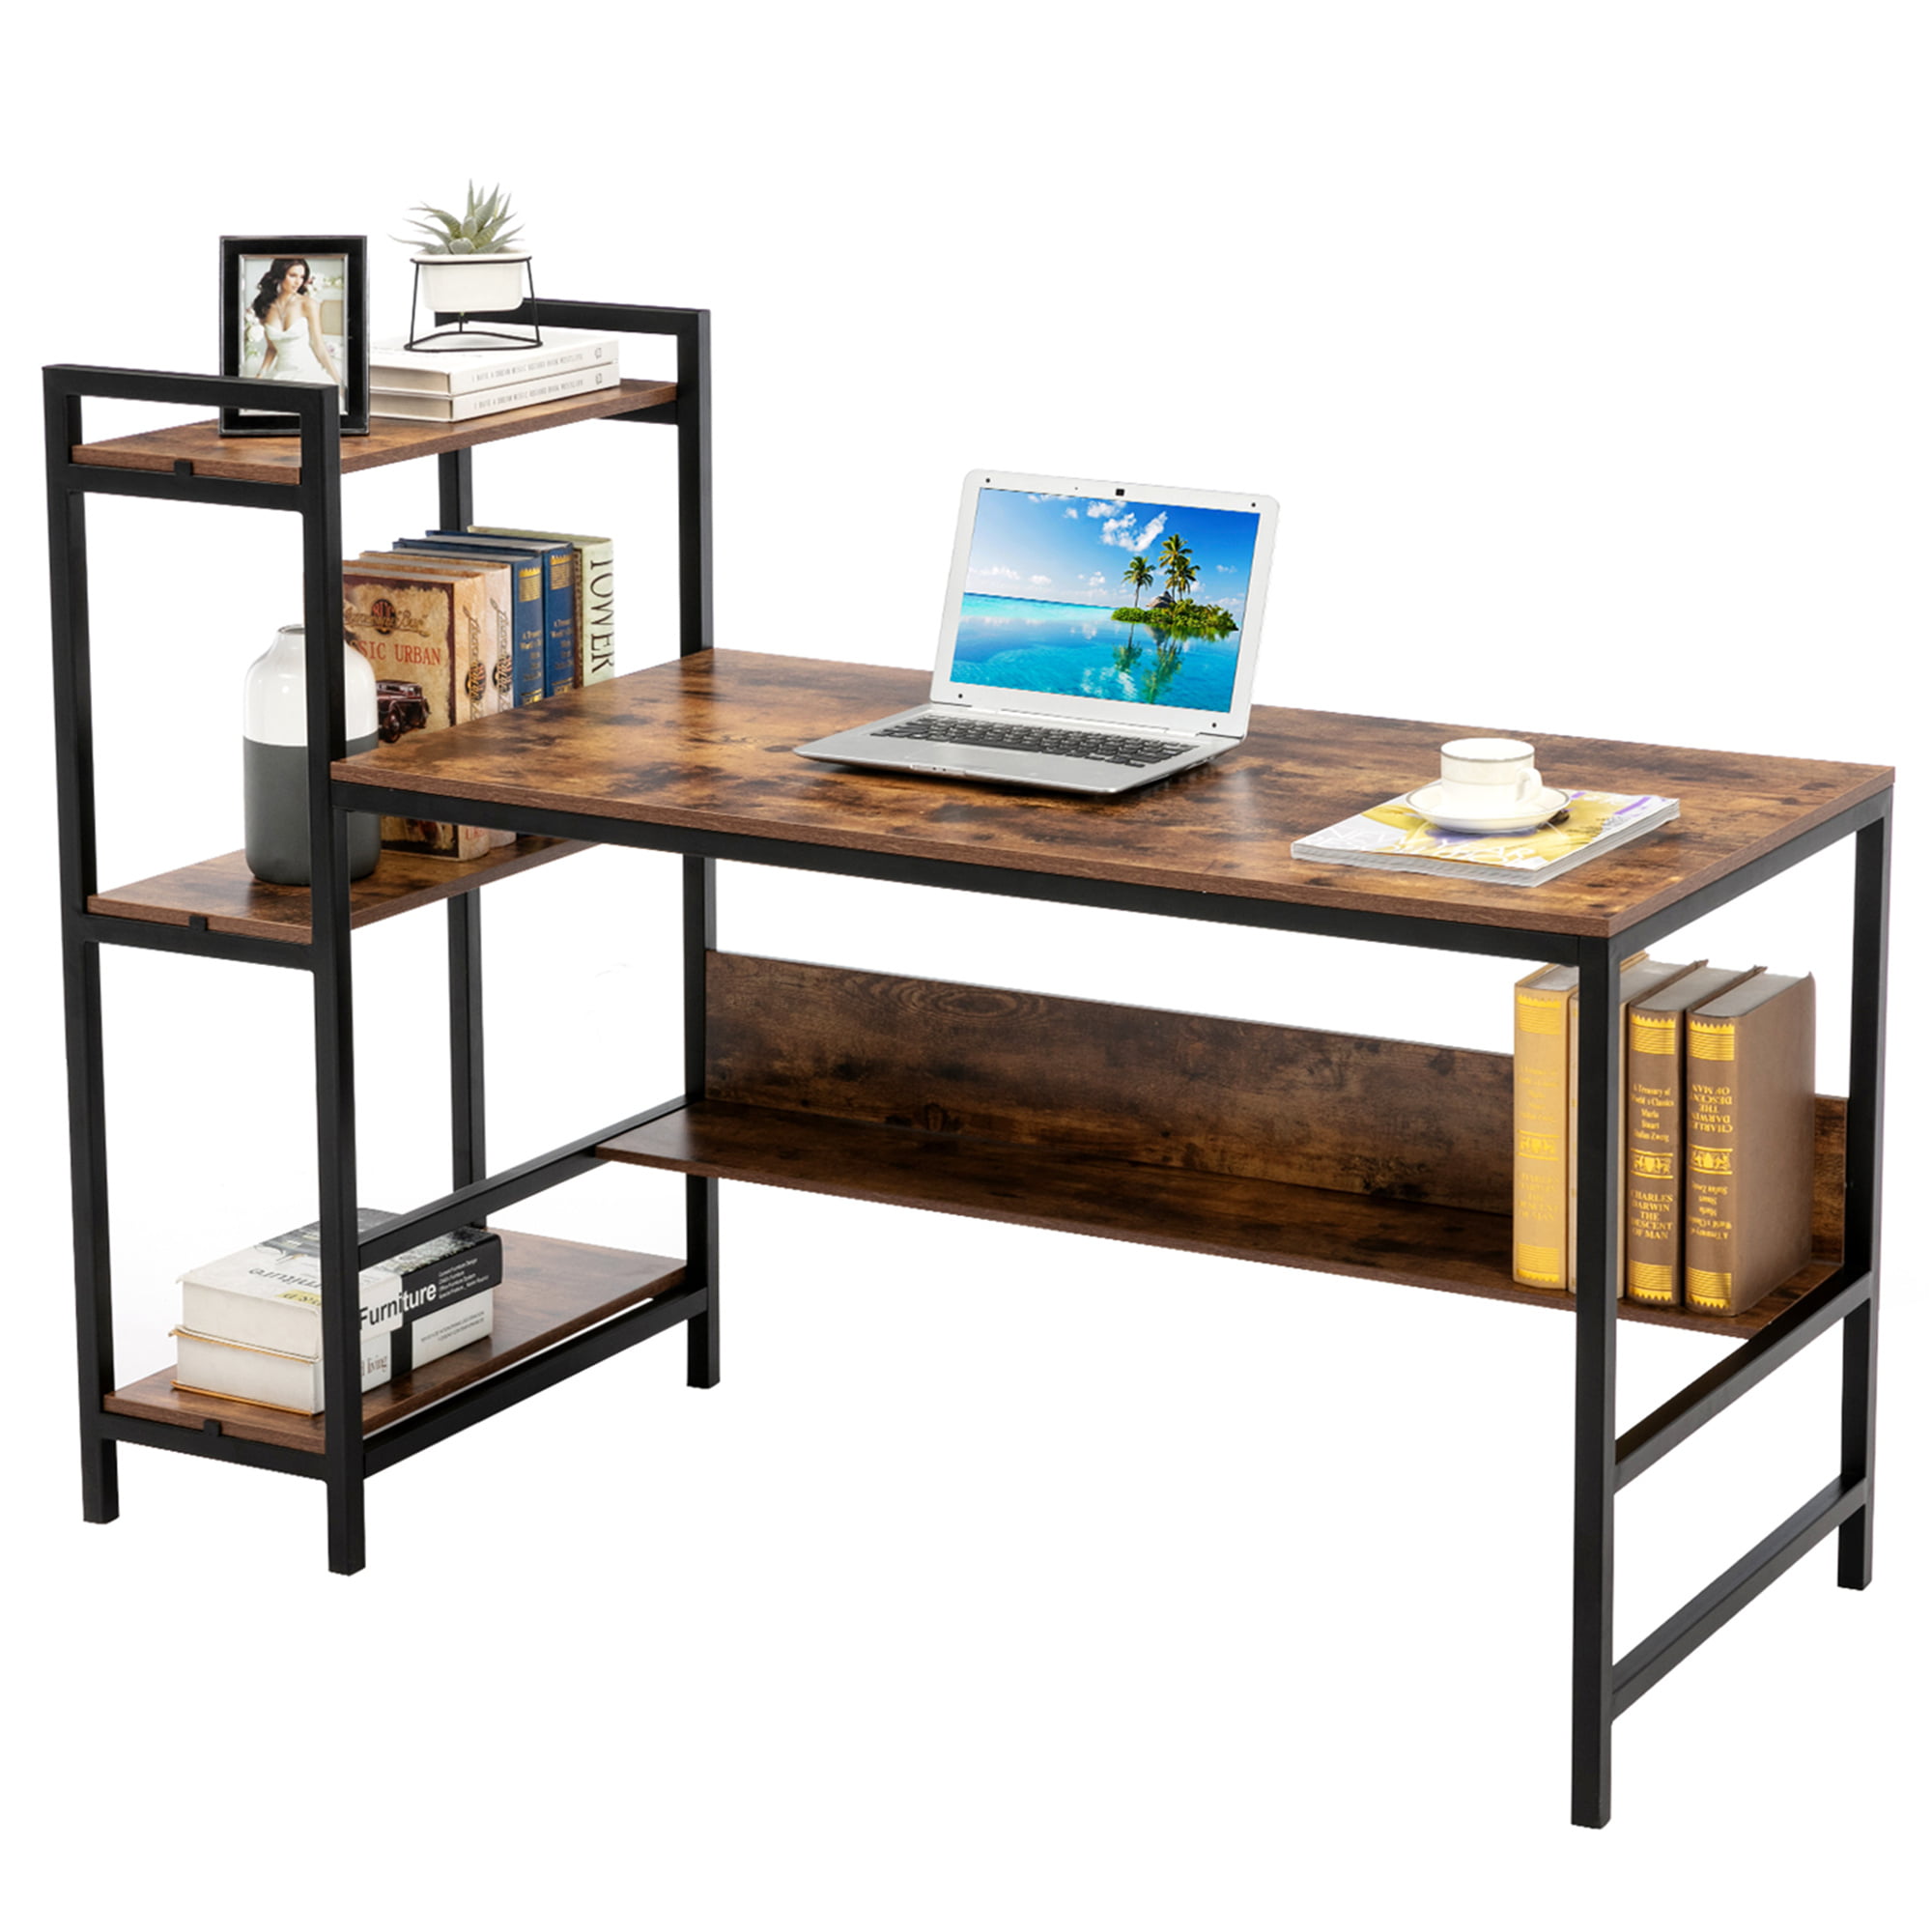 Details about   Durable Wooden Computer Laptop Desk Home Office Home Furniture Brown Color NEW 